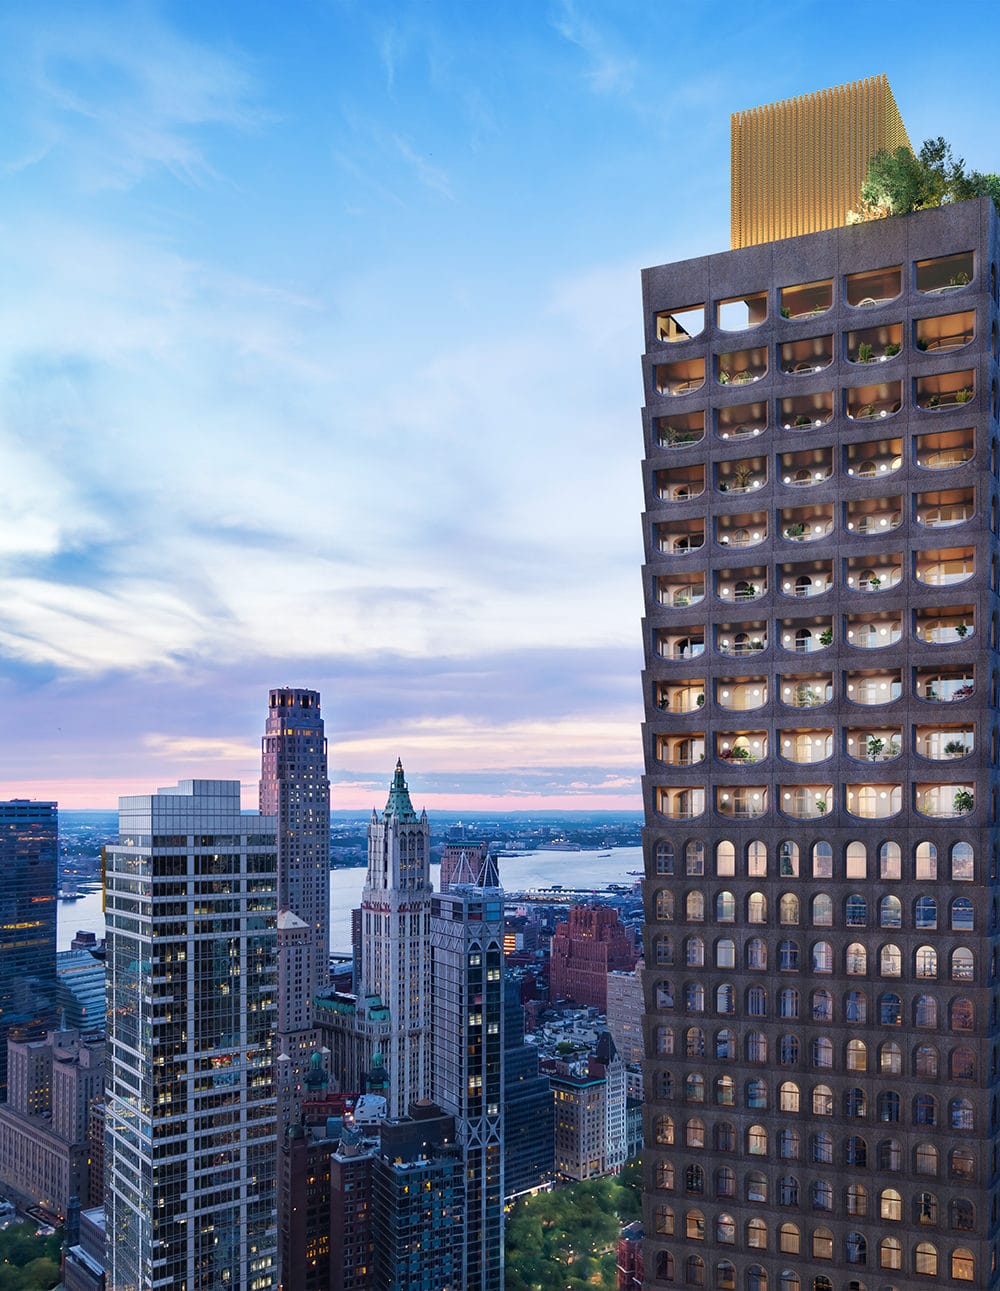 Exterior aerial view of 130 William condominiums in New York City. Includes surrounding buildings and daytime sky.